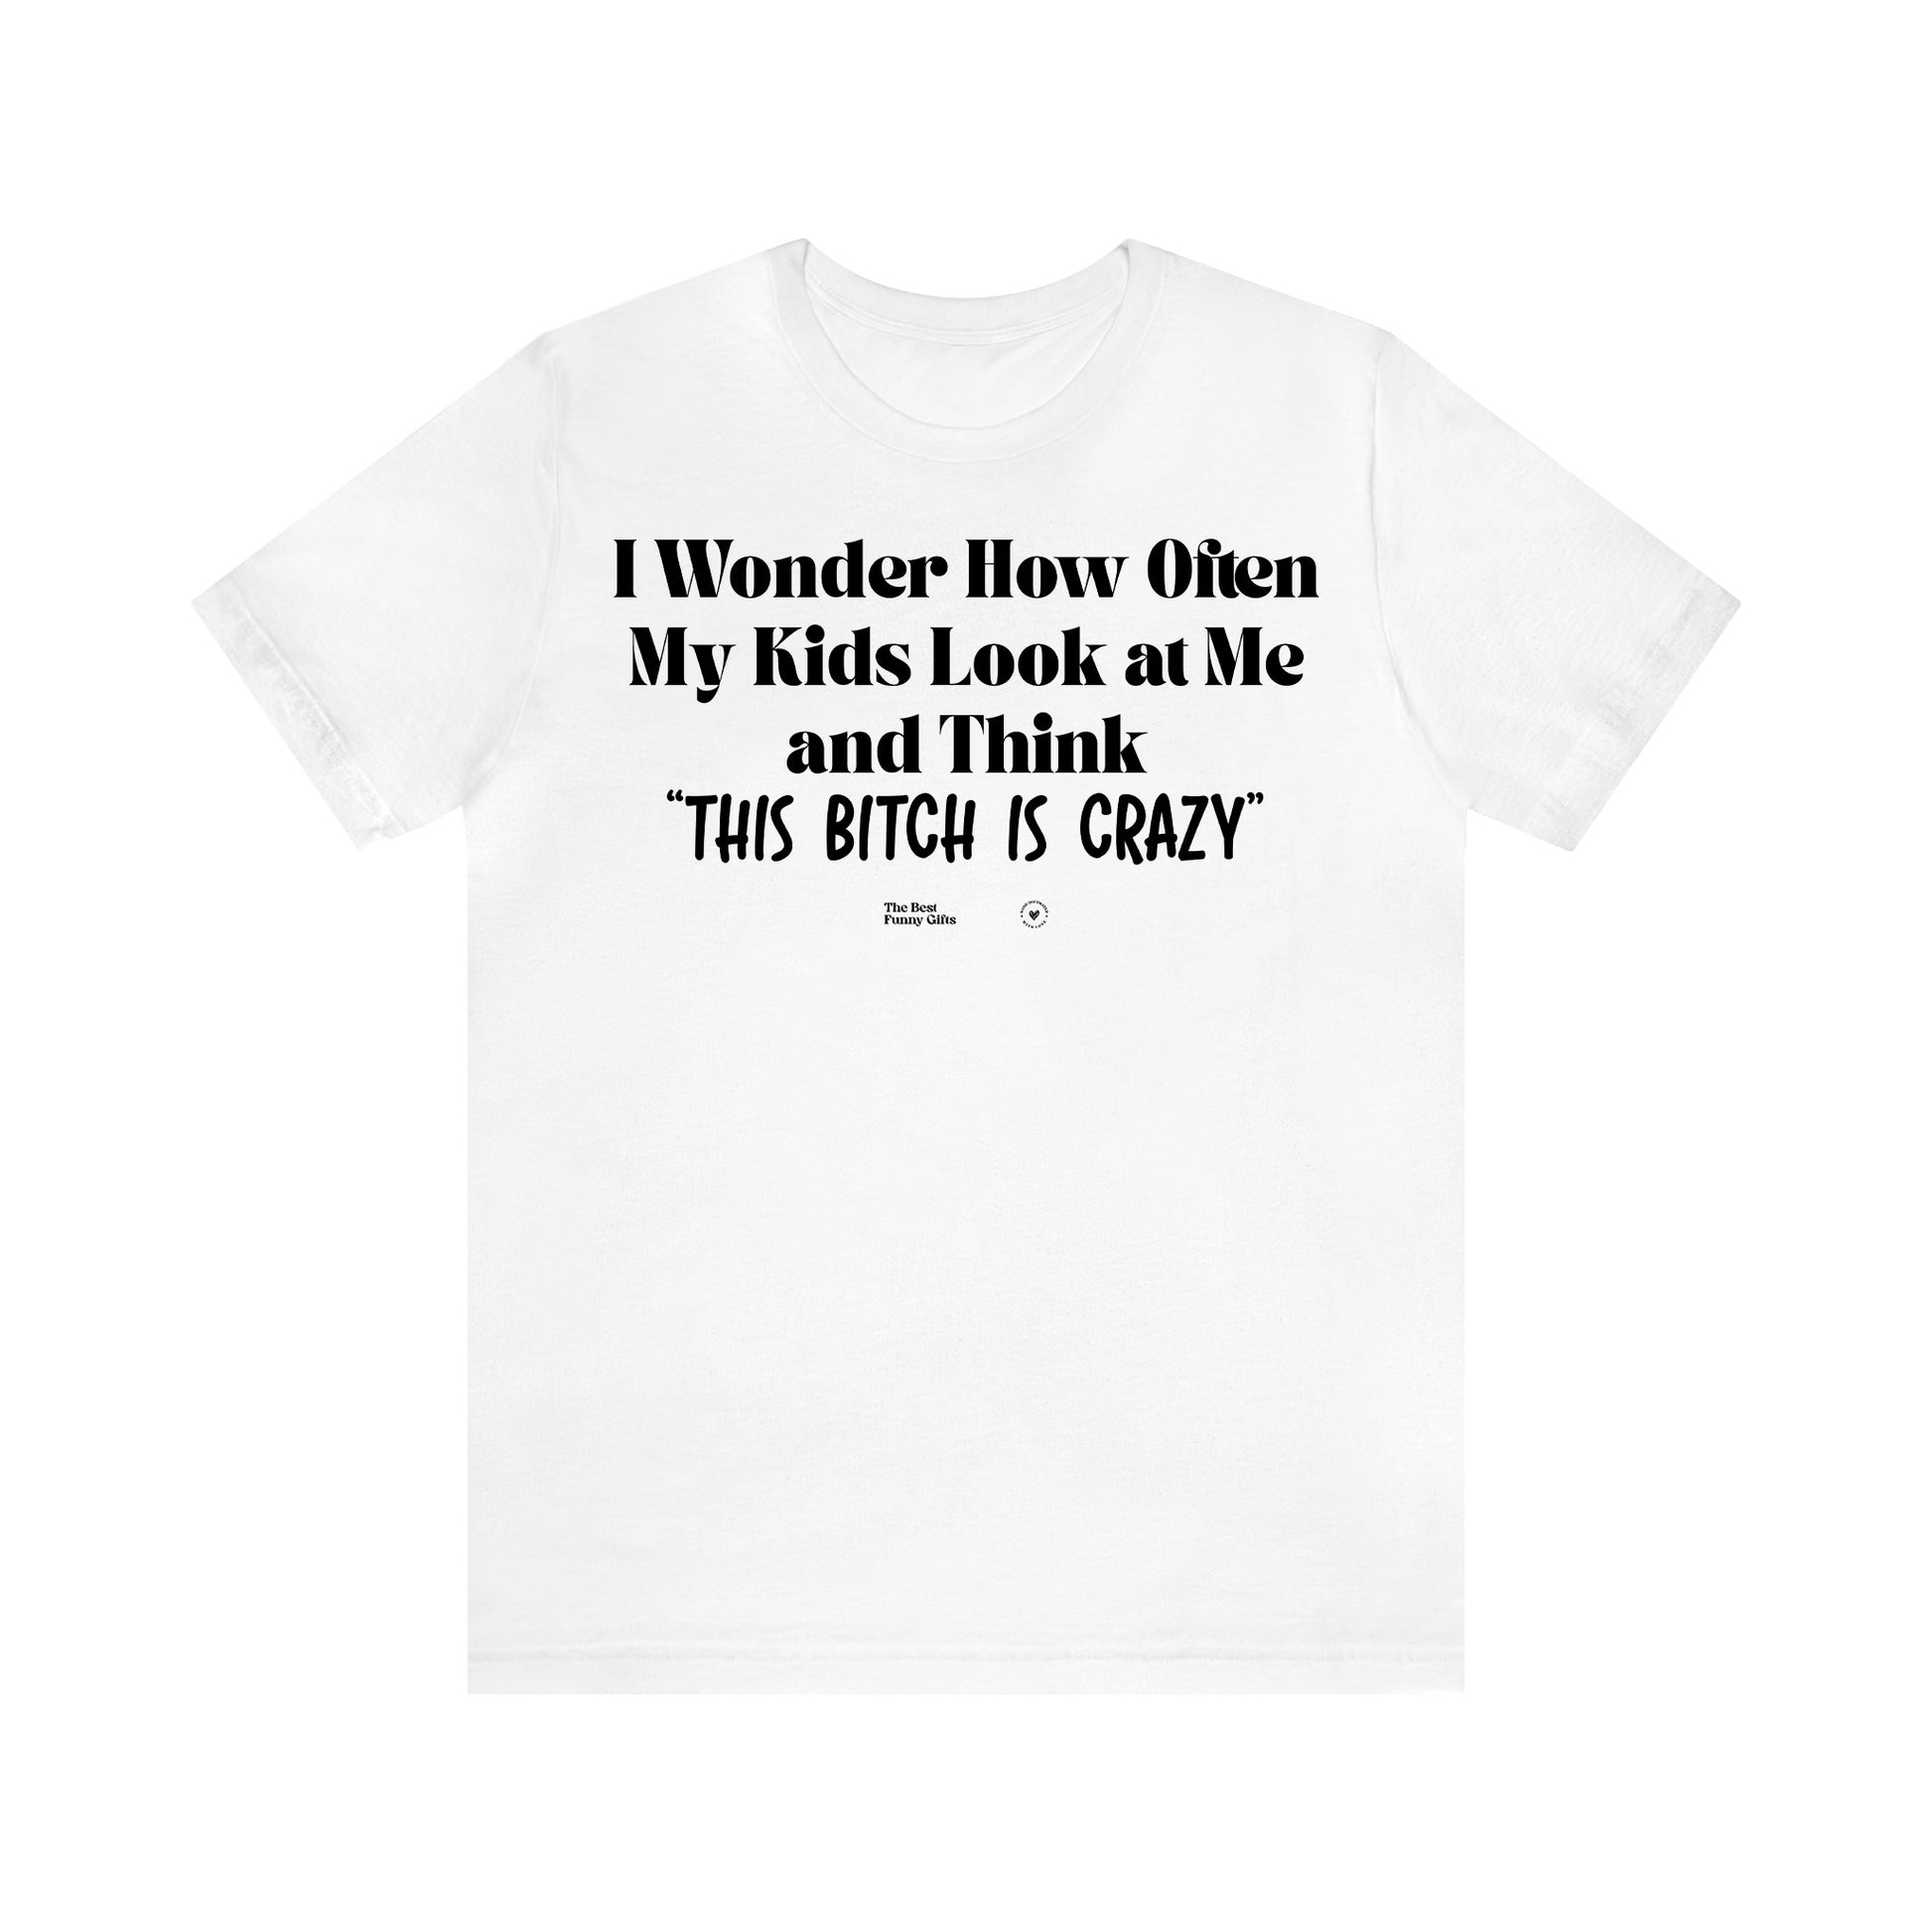 Women's T Shirts I Wonder How Often My Kids Look at Me and Think "This Bitch is Crazy"  - The Best Funny Gifts